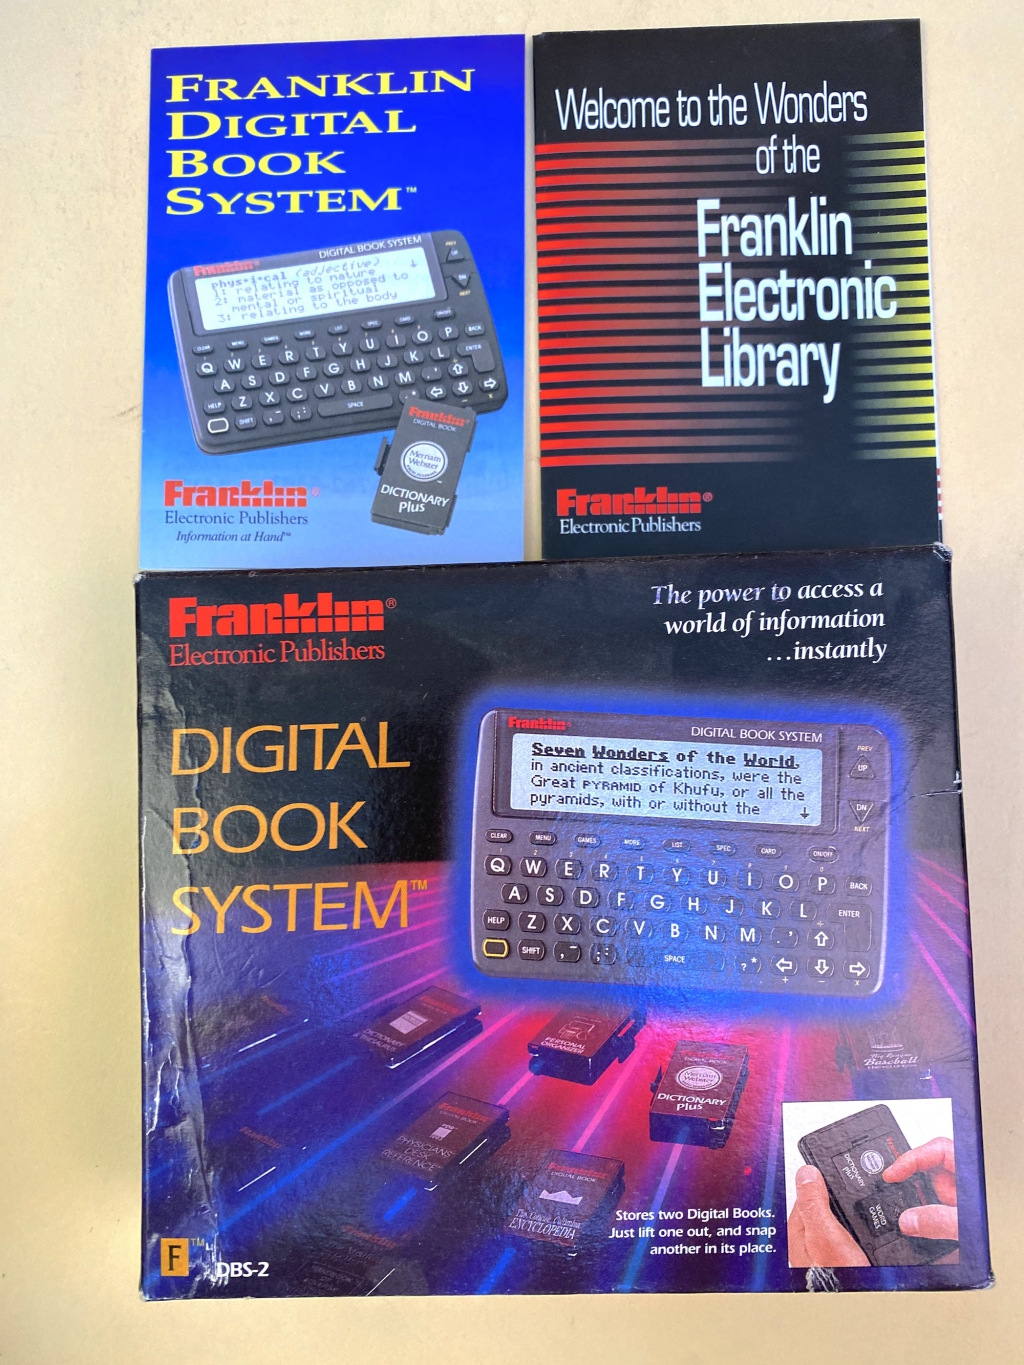 The box containing the Digital Book System